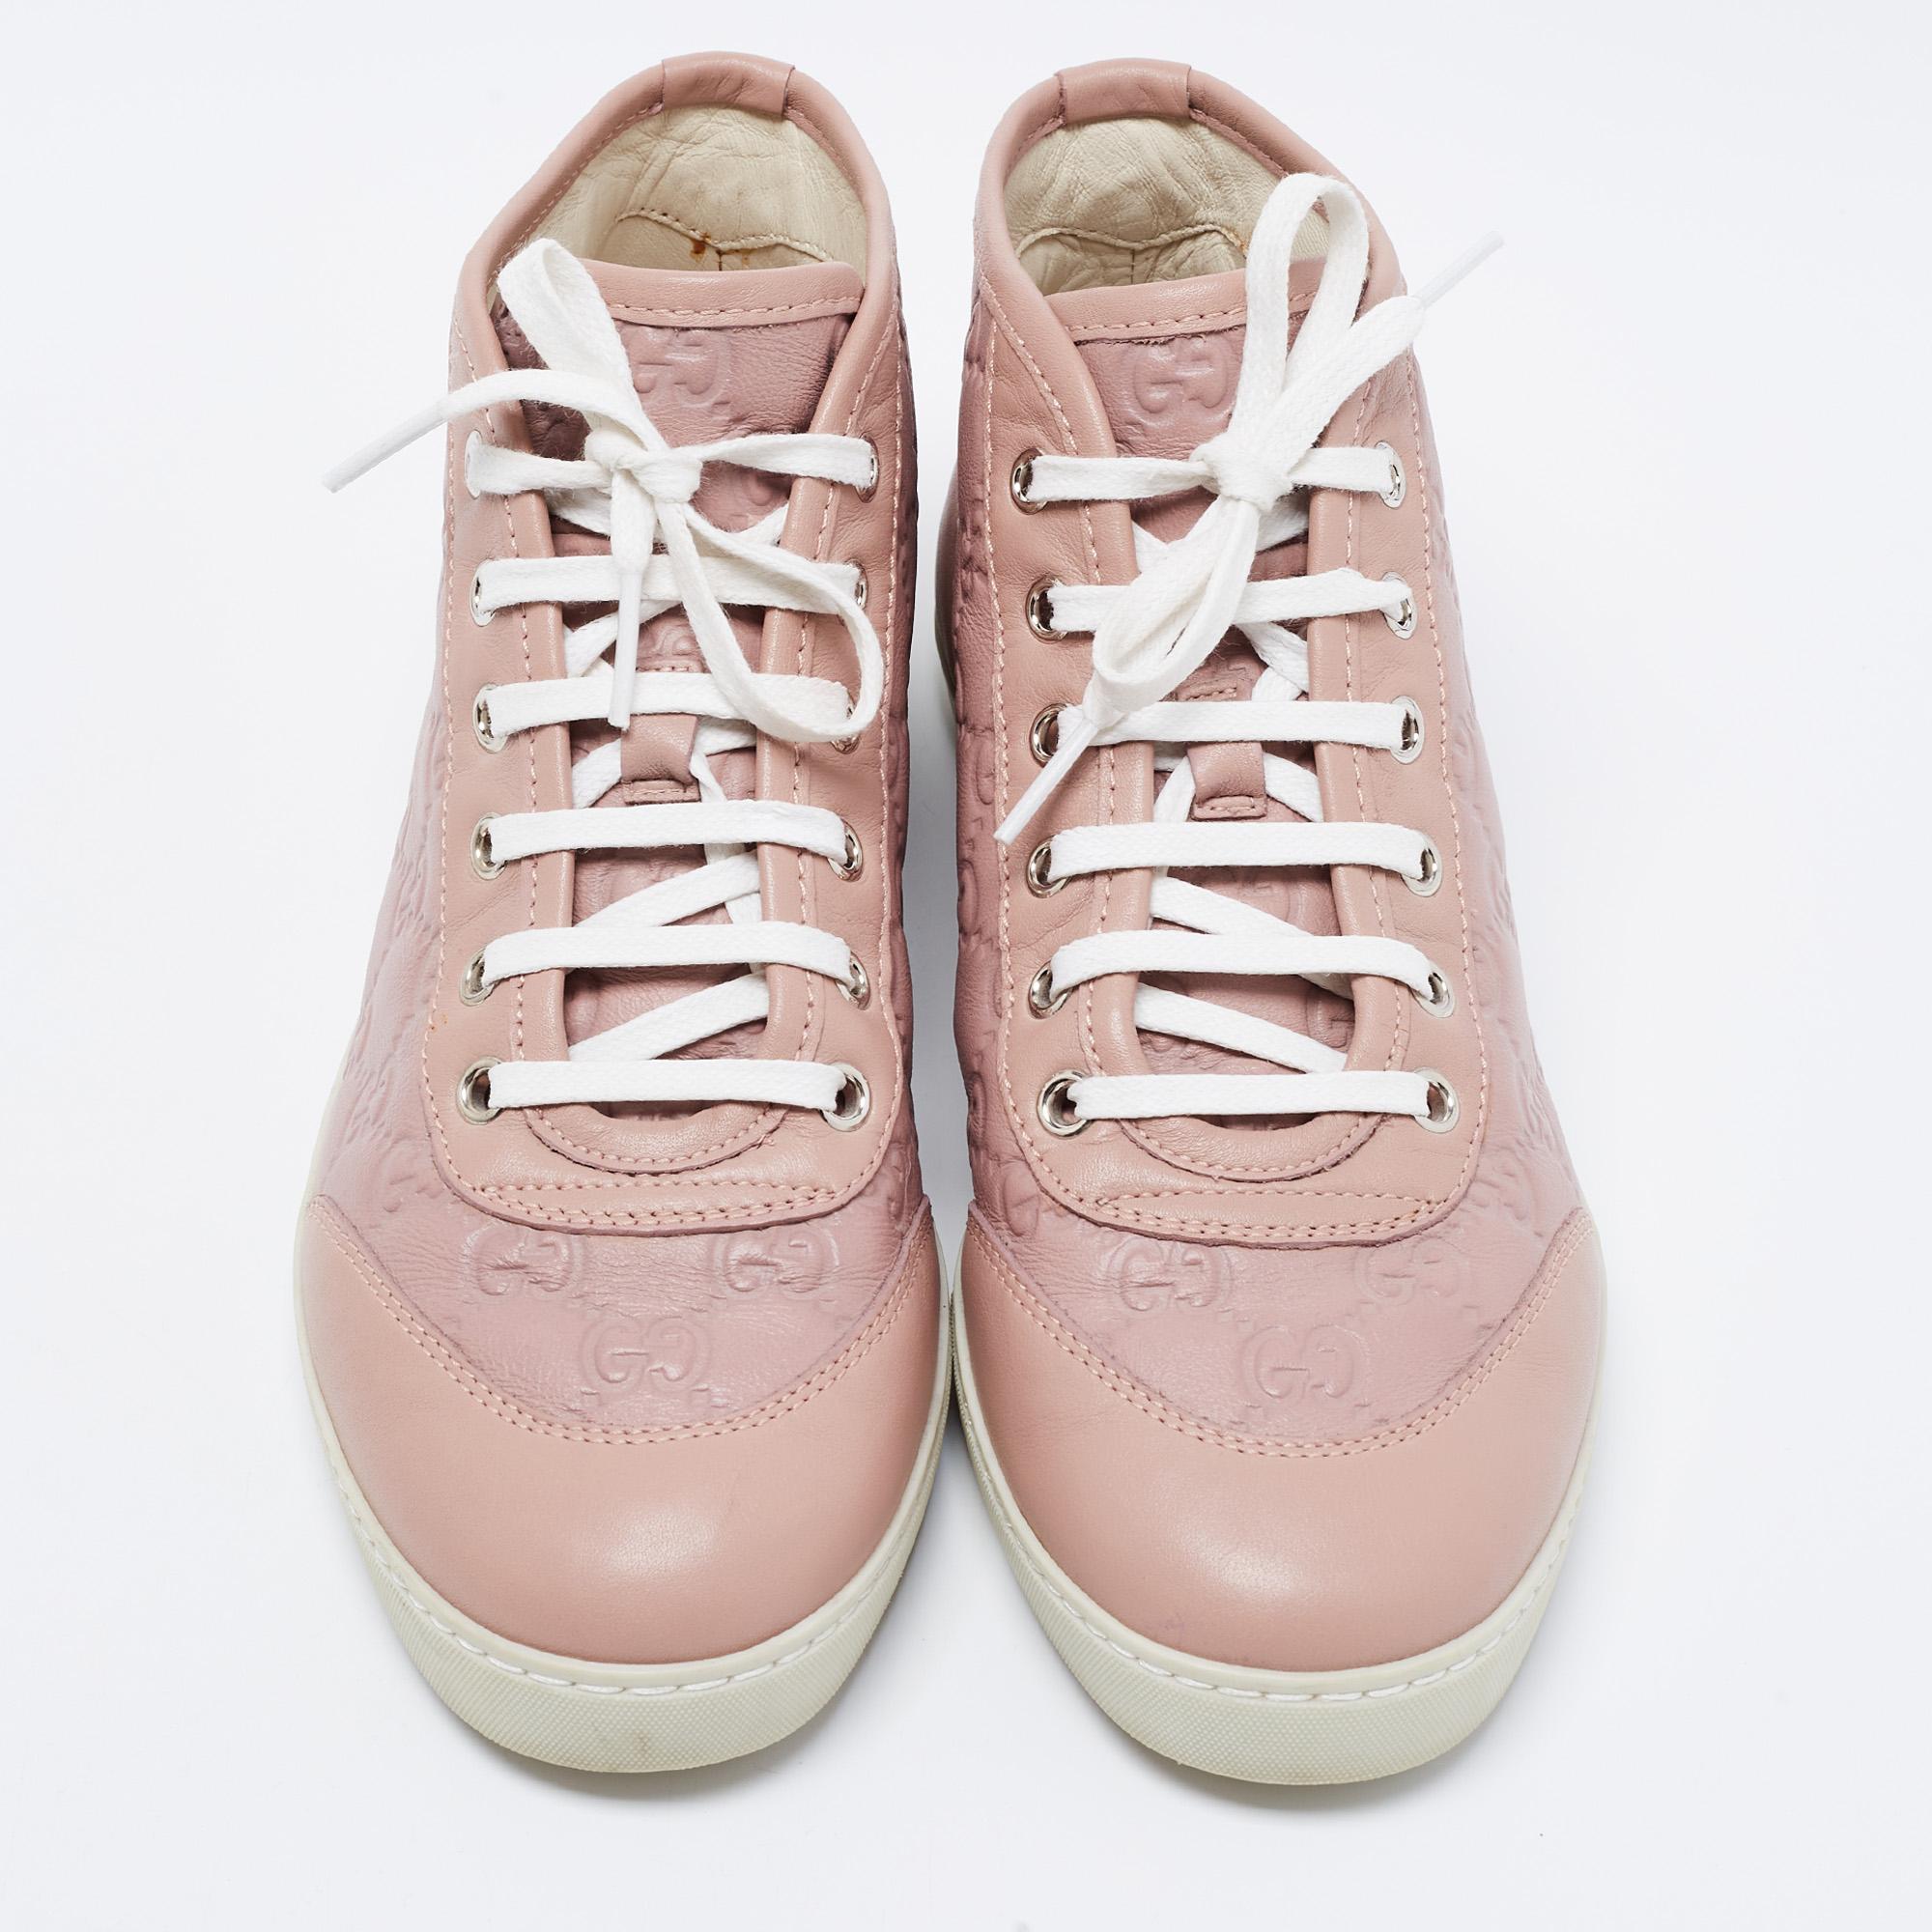 If you wish to move in style, then these Gucci sneakers are the perfect option for you. They are created from Guccissima leather with lace-up vamps, a brand signature on the heels, and rubber soles.

